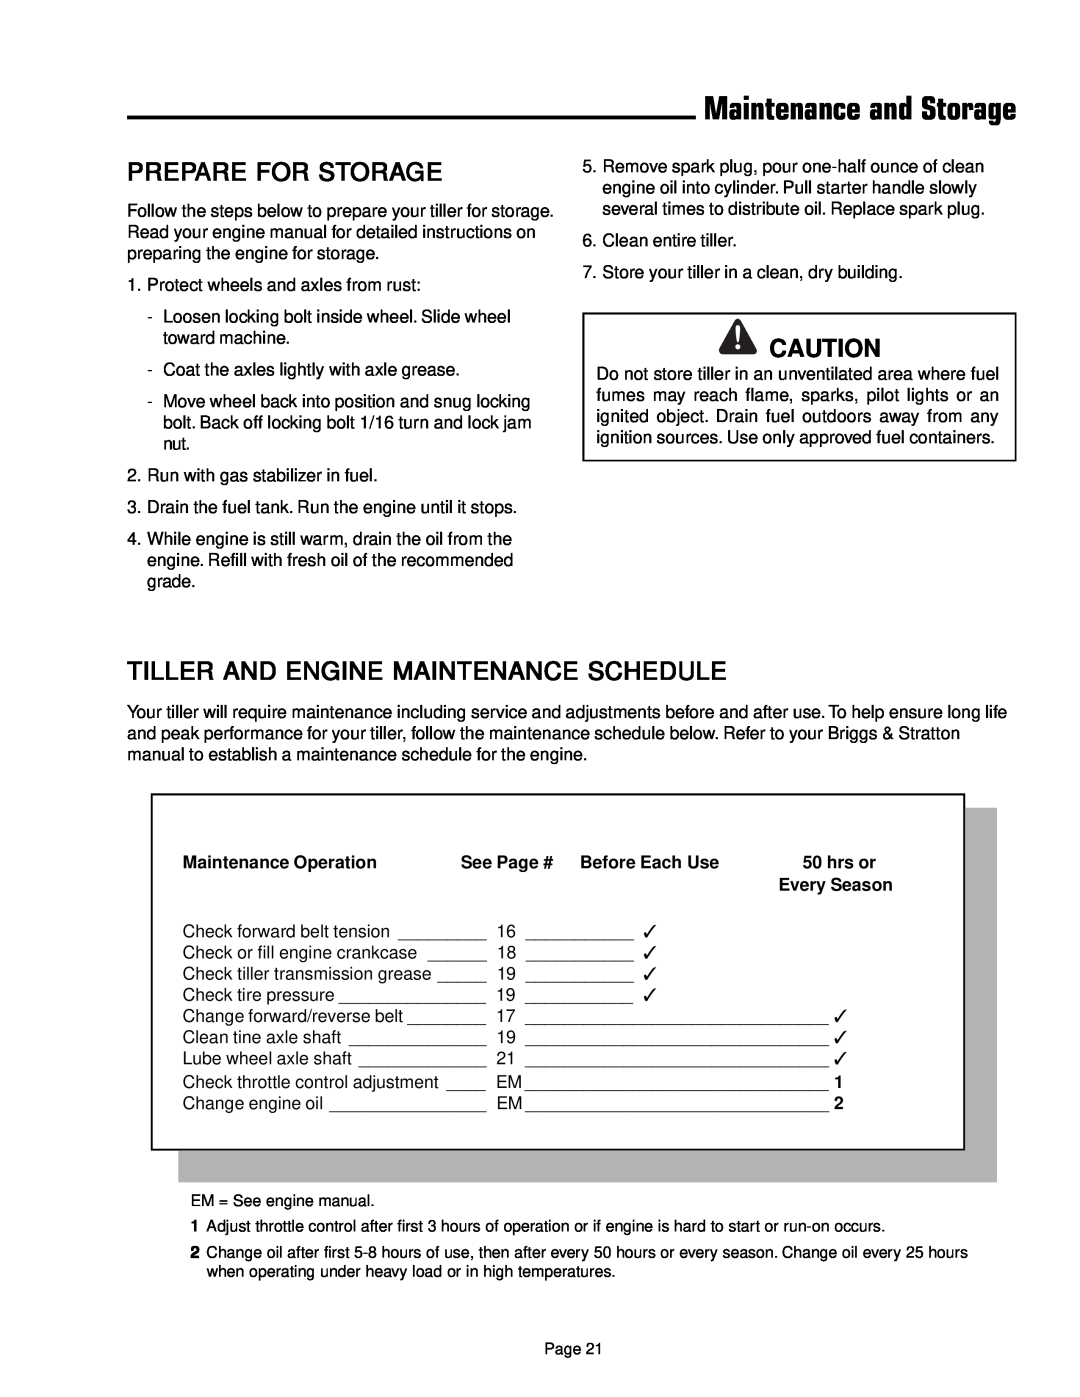 Simplicity 1693847 manual Prepare For Storage, Tiller And Engine Maintenance Schedule, Maintenance and Storage, hrs or 